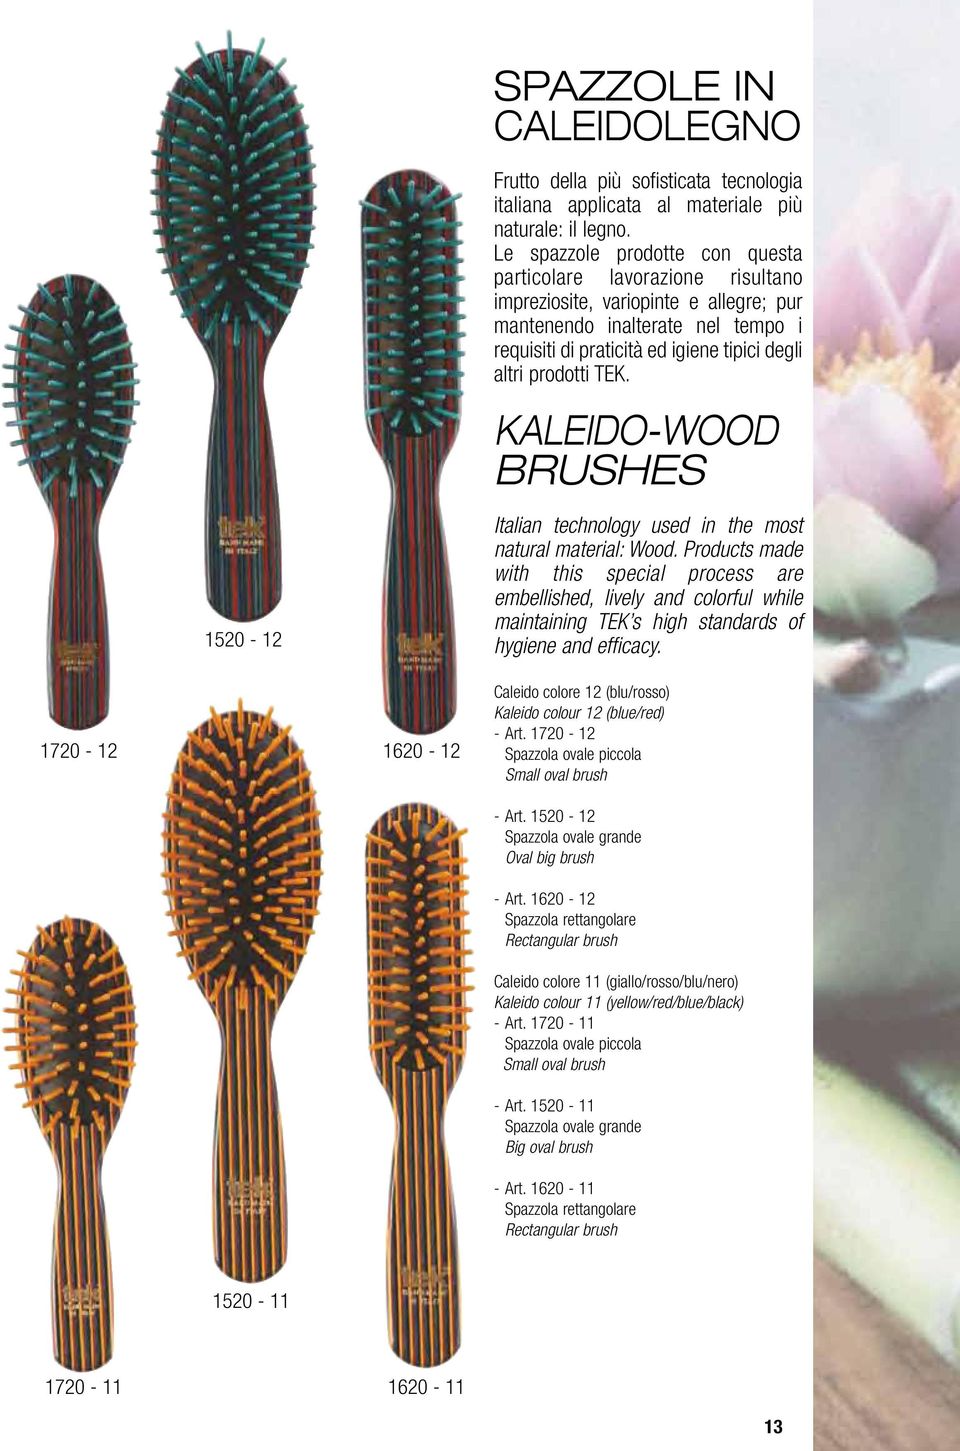 prodotti TEK. KALEIDO-WOOD BRUSHES Italian technology used in the most natural material: Wood.